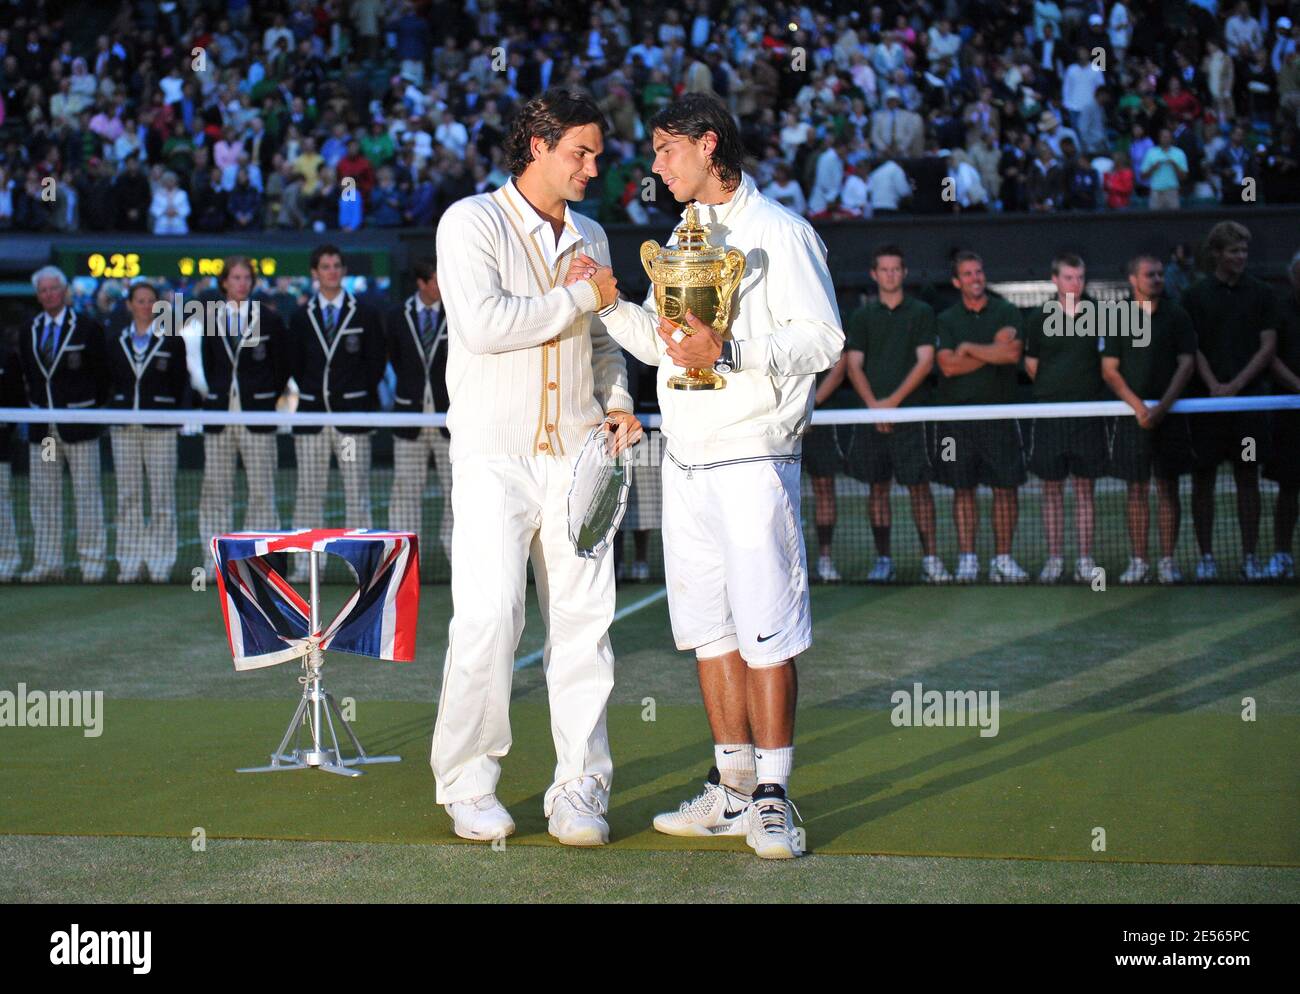 Spain's Rafael Nadal right, stands with the winners trophy next to  Switzerland's Roger Federer after their final tennis match of the 2008  Wimbledon championships against at The All England Tennis Club in